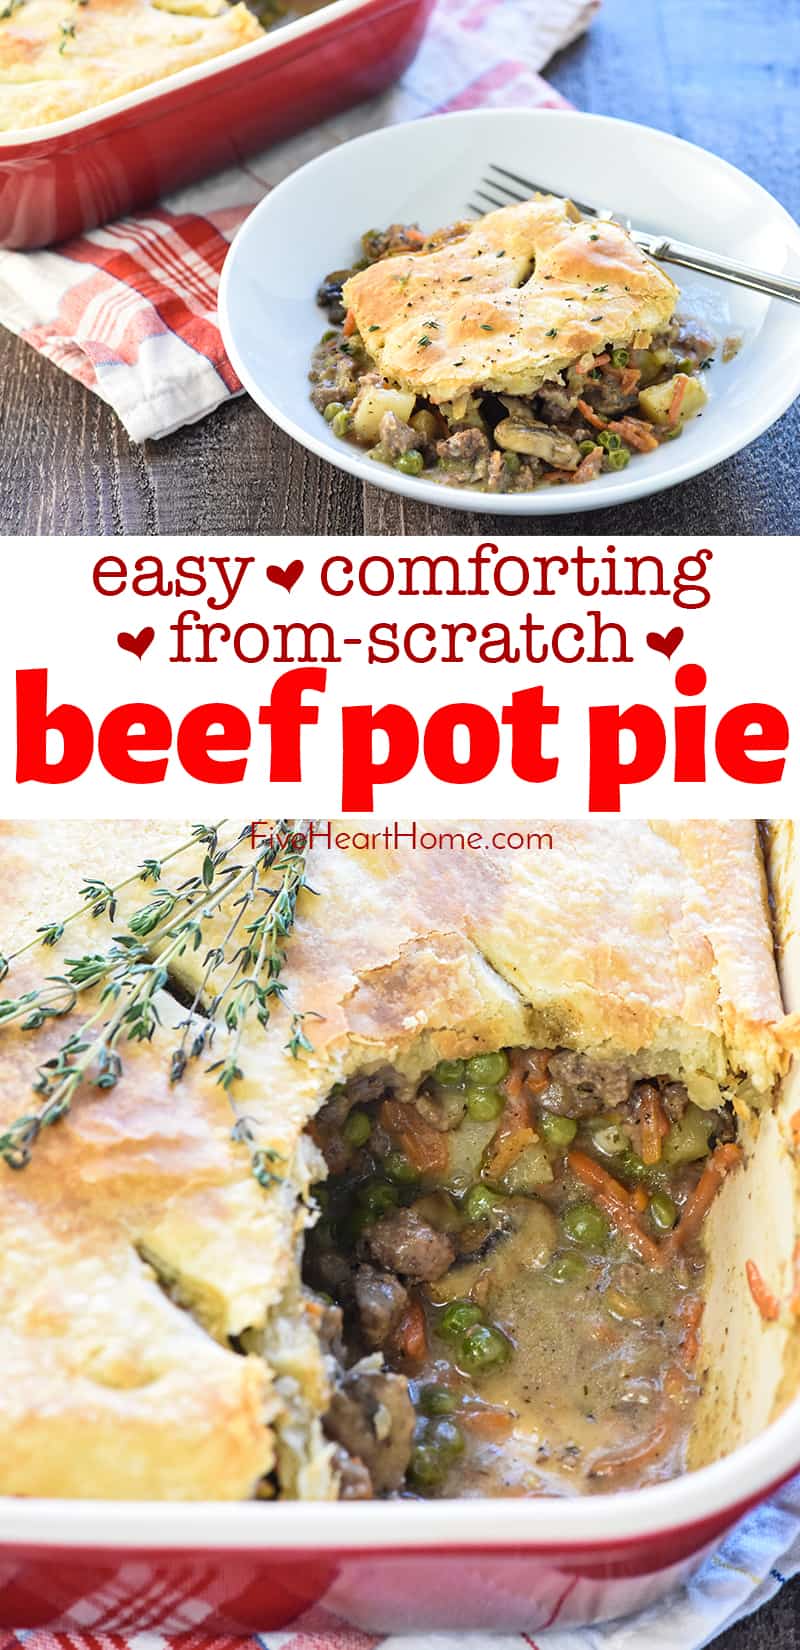 Beef Pot Pie ~ a hearty, delicious comfort food recipe featuring savory ground beef and veggies in a flavorful gravy topped by a flaky, buttery pie crust. And if you prefer, it's just as easy to make it with tender cubed beef! | FiveHeartHome.com #potpie #beefpotpie #potpierecipe via @fivehearthome